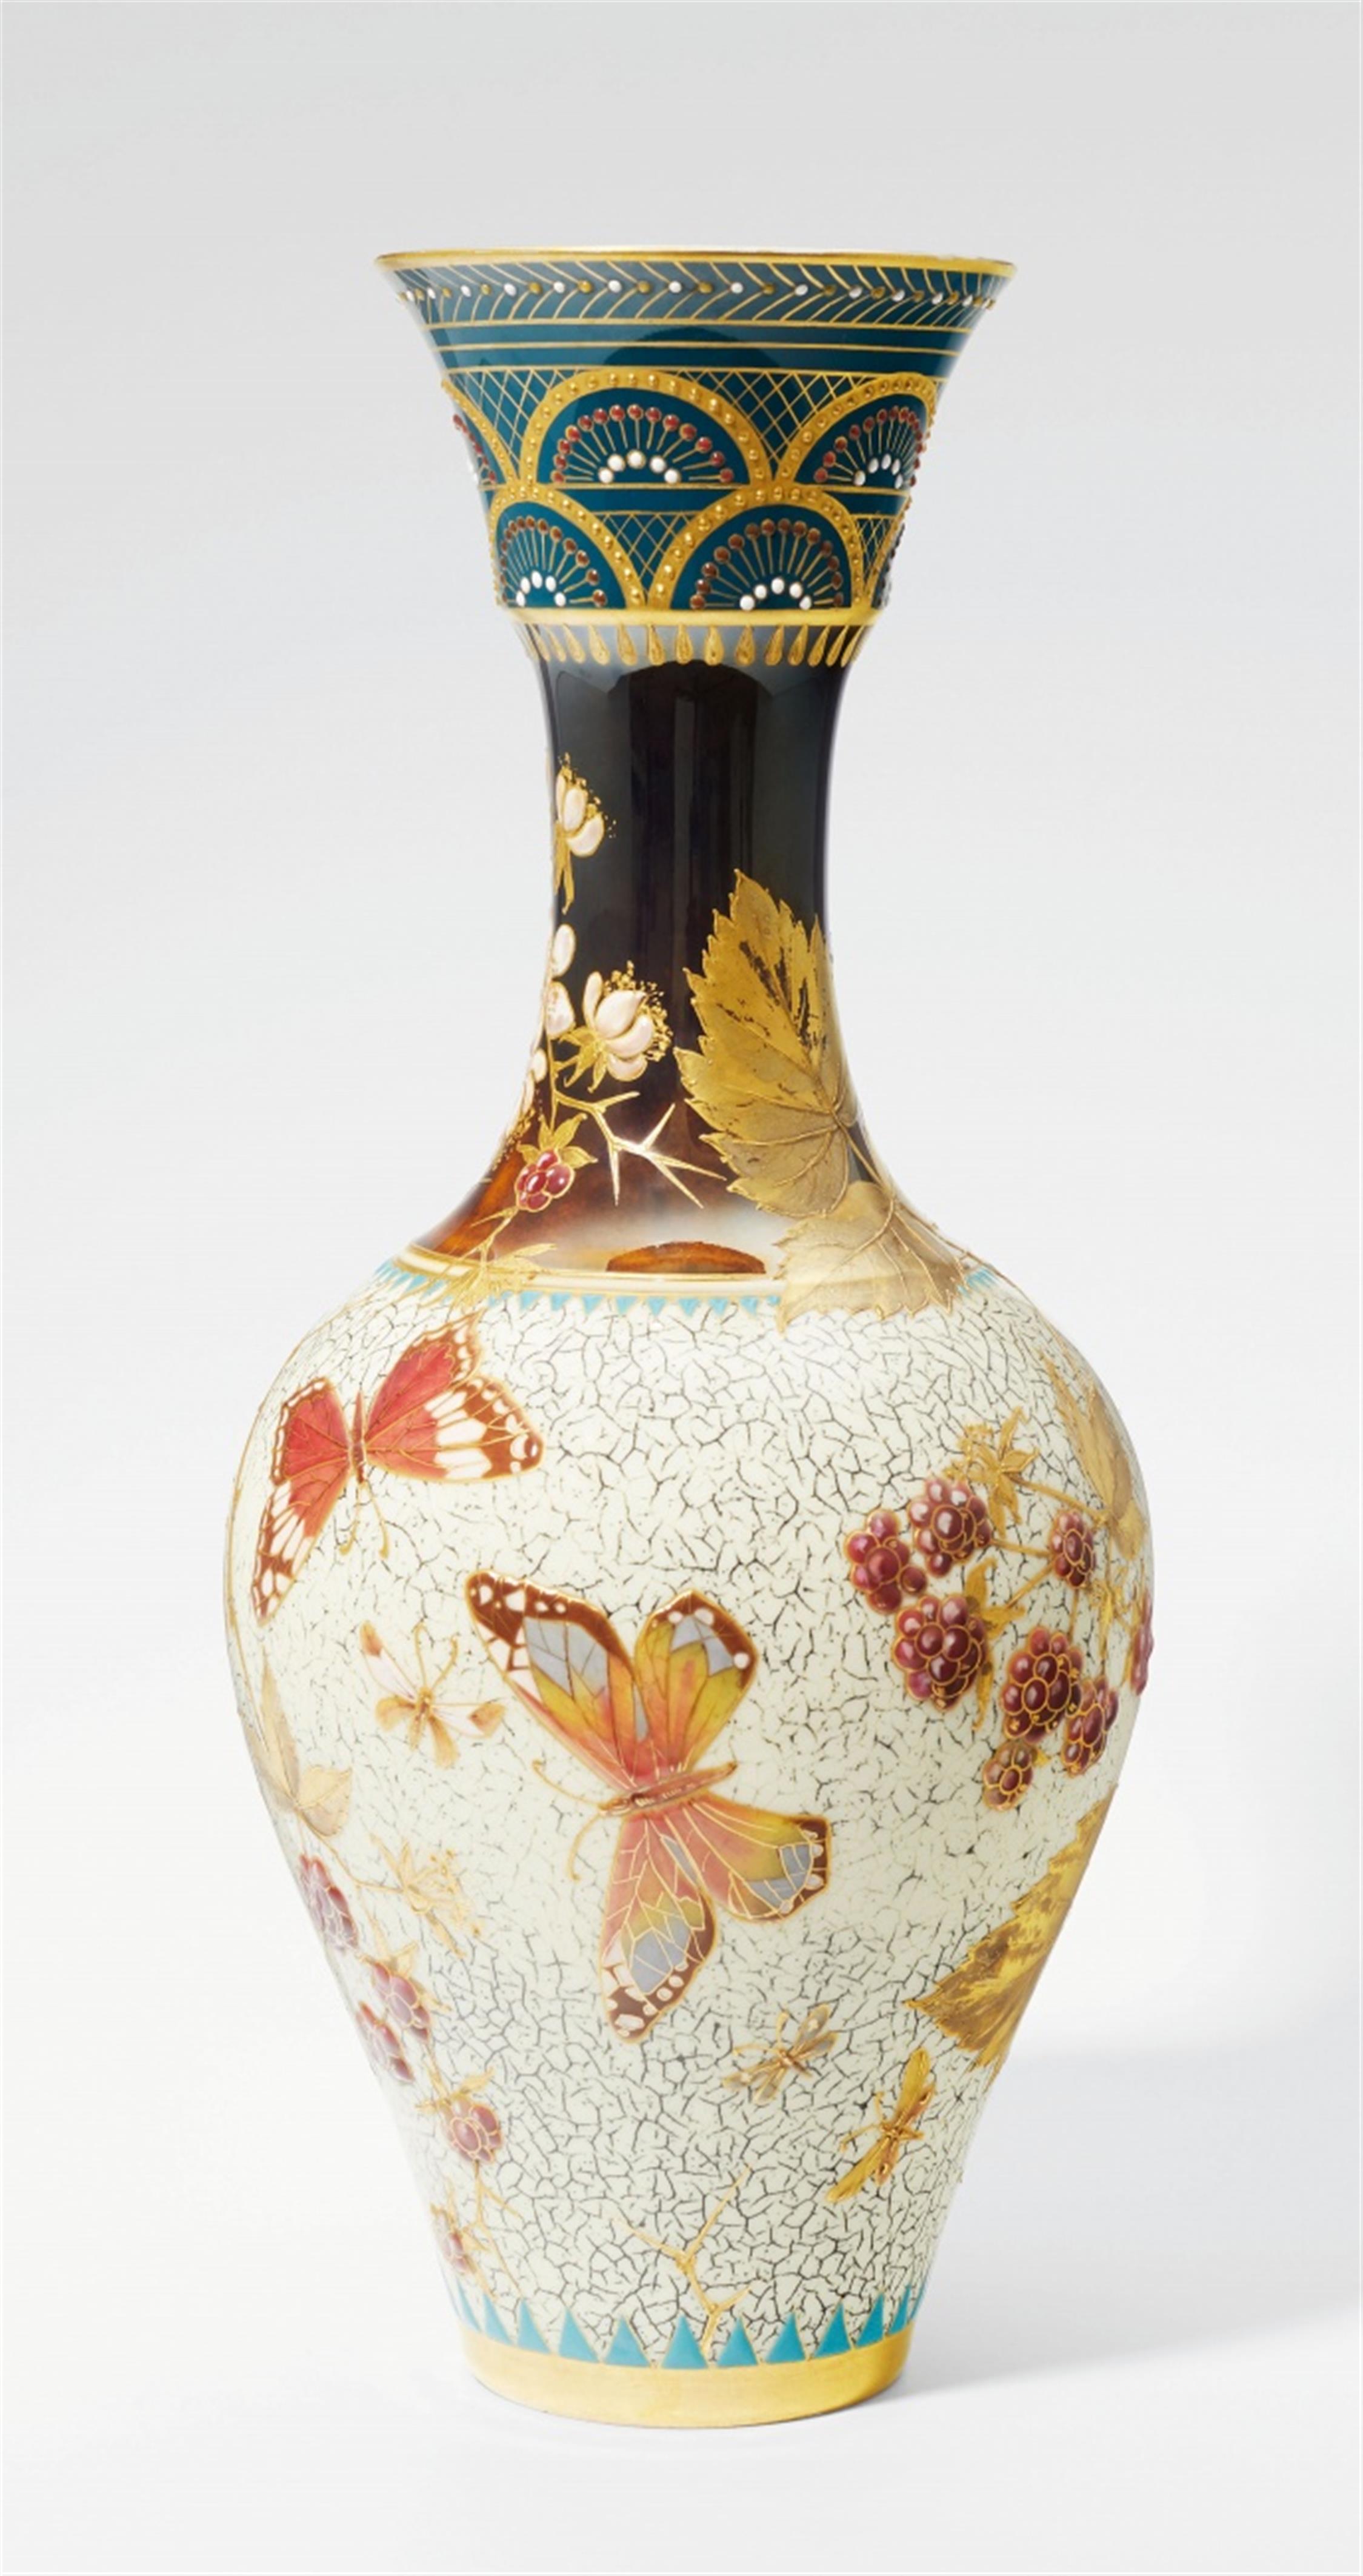 A rare Berlin KPM porcelain vase with tiered decoration - image-1